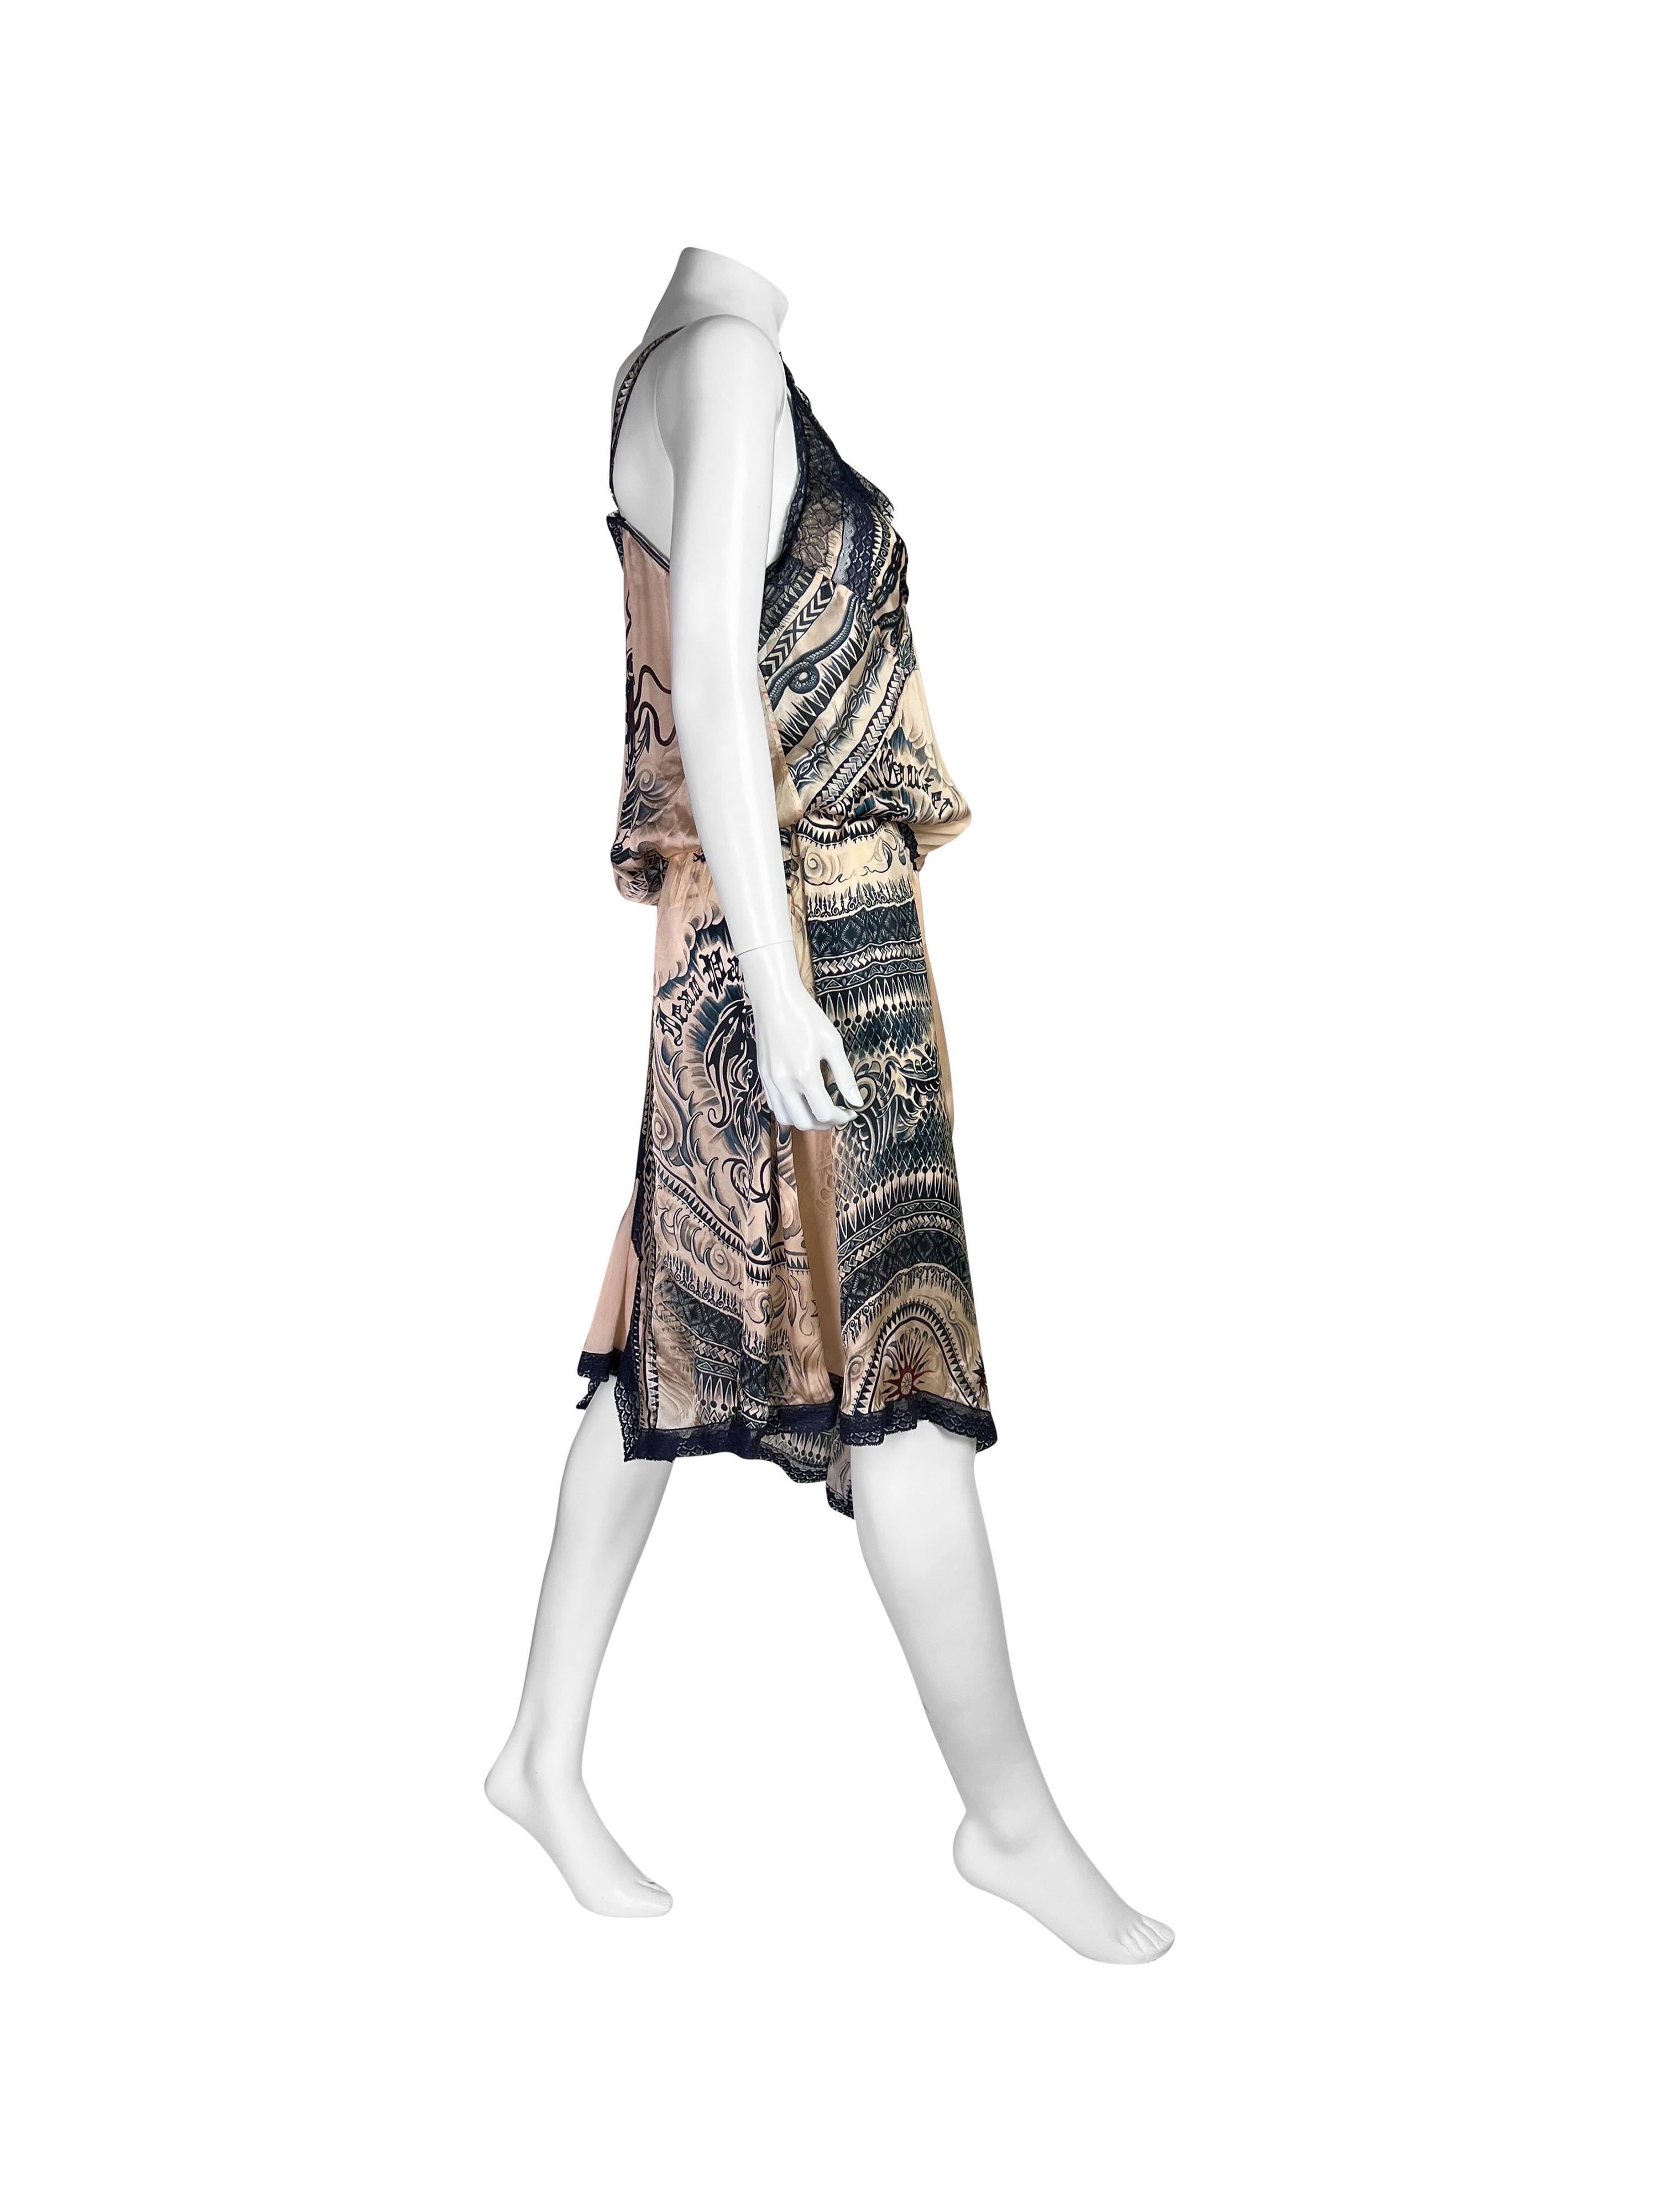 New With Tags, amazing, size flexible 100% silk dress with an iconic Jean-Paul Gaultier Nautical Tattoo Print, signature for the collection.

Thanks it’s tie-up waist, can be styled in various ways and is larger sizes friendly too.

Size IT 42,